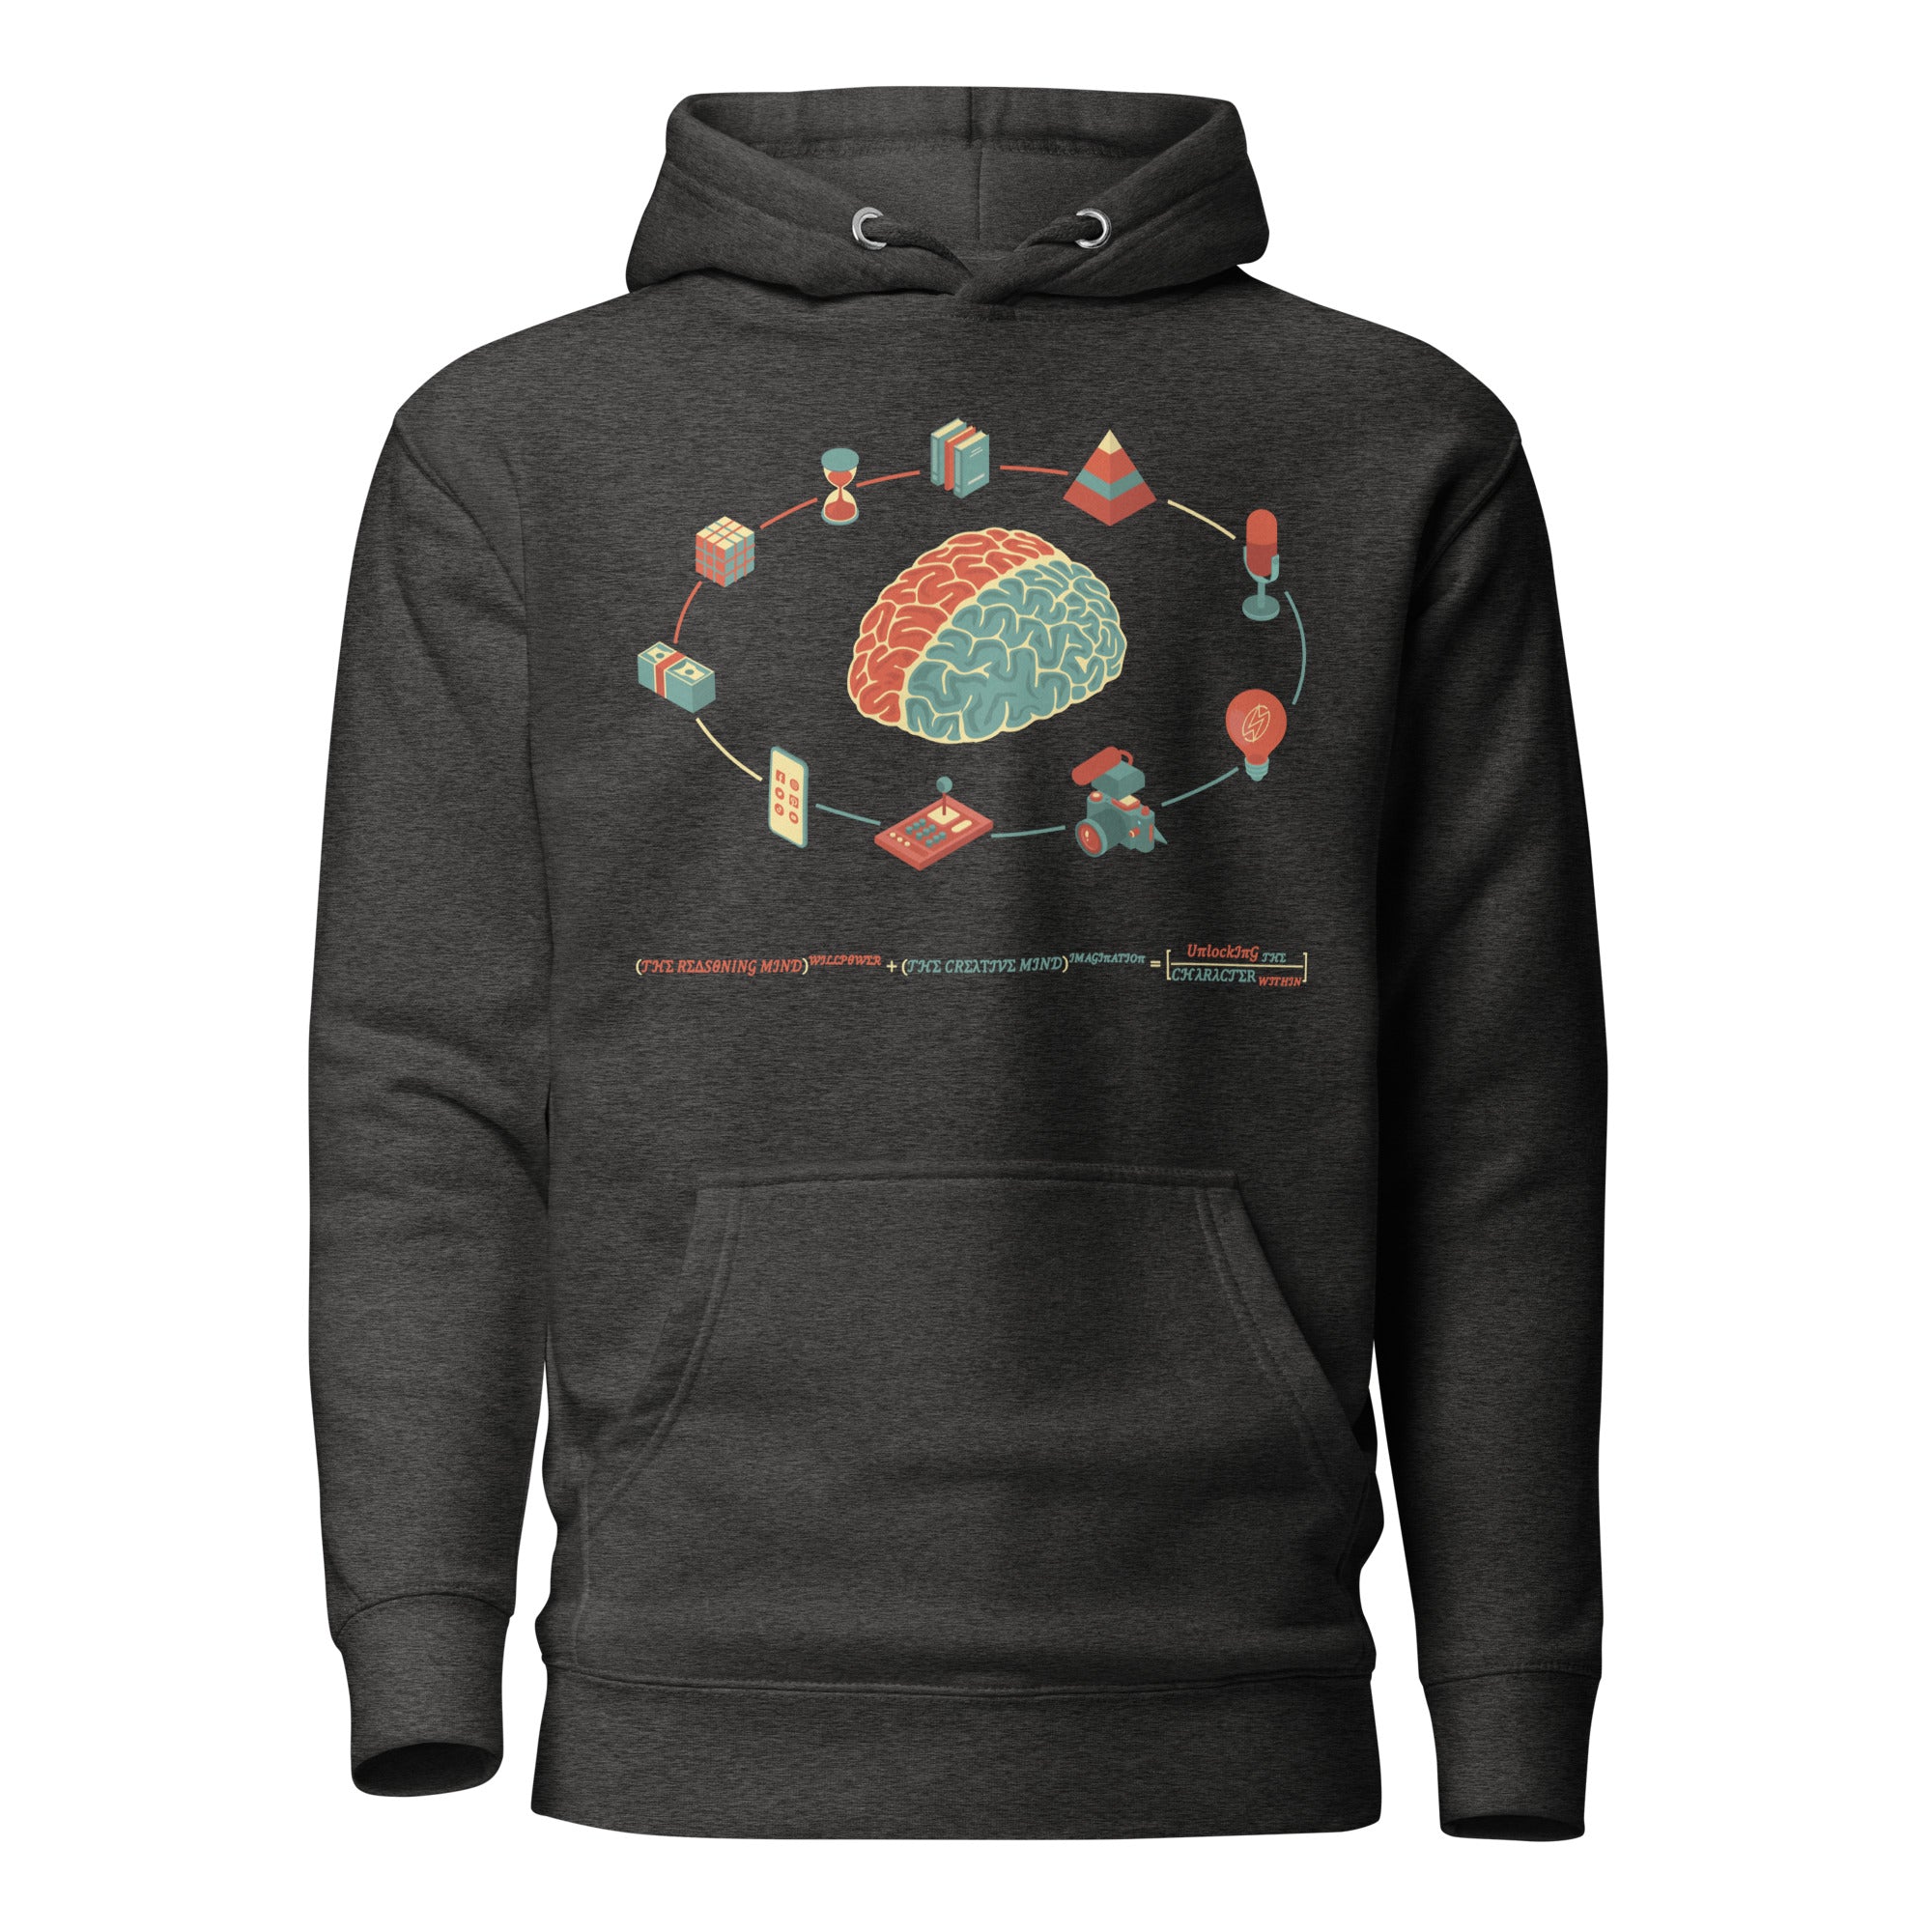 Two Minds Aligned - Unisex Hoodie